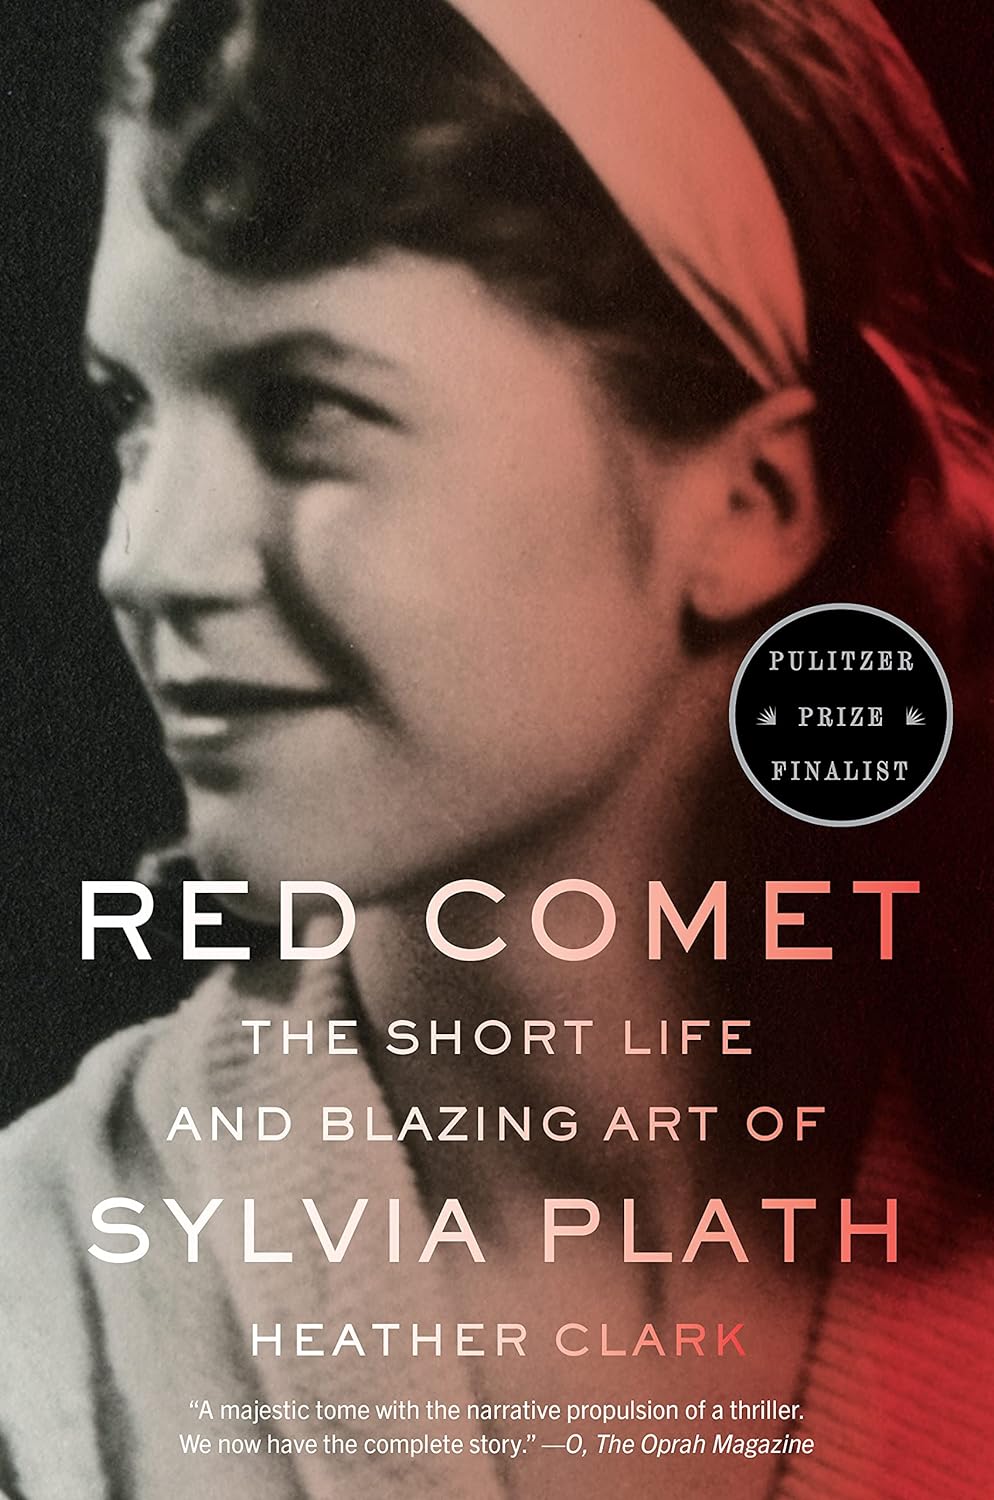 Red Comet- The Short Life and Blazing Art of Sylvia Plath - Heather Clark